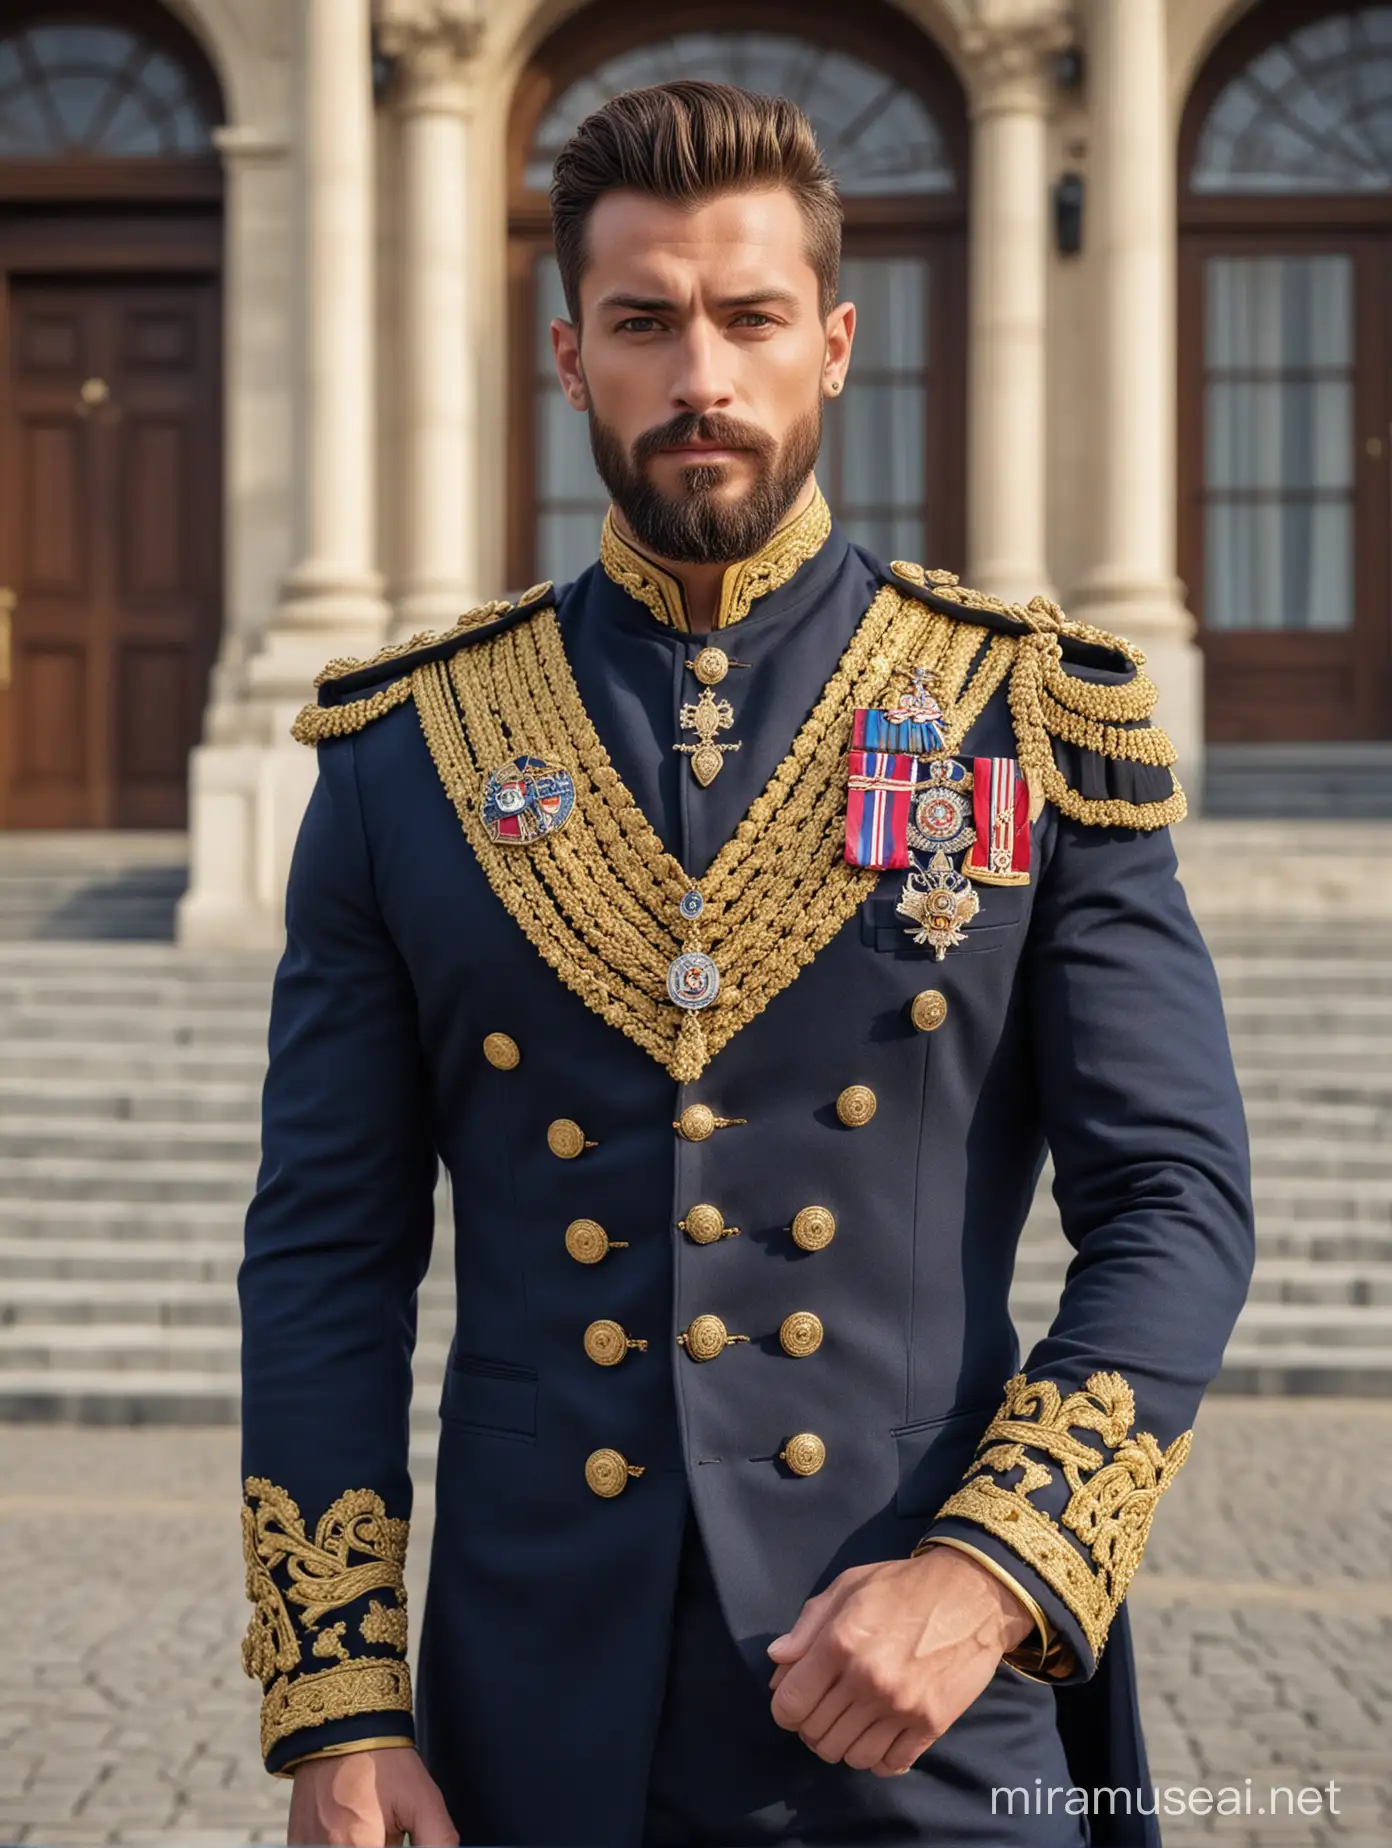 Regal Bodybuilder King in Navy and Gold Cavalry Suit Outside Palace